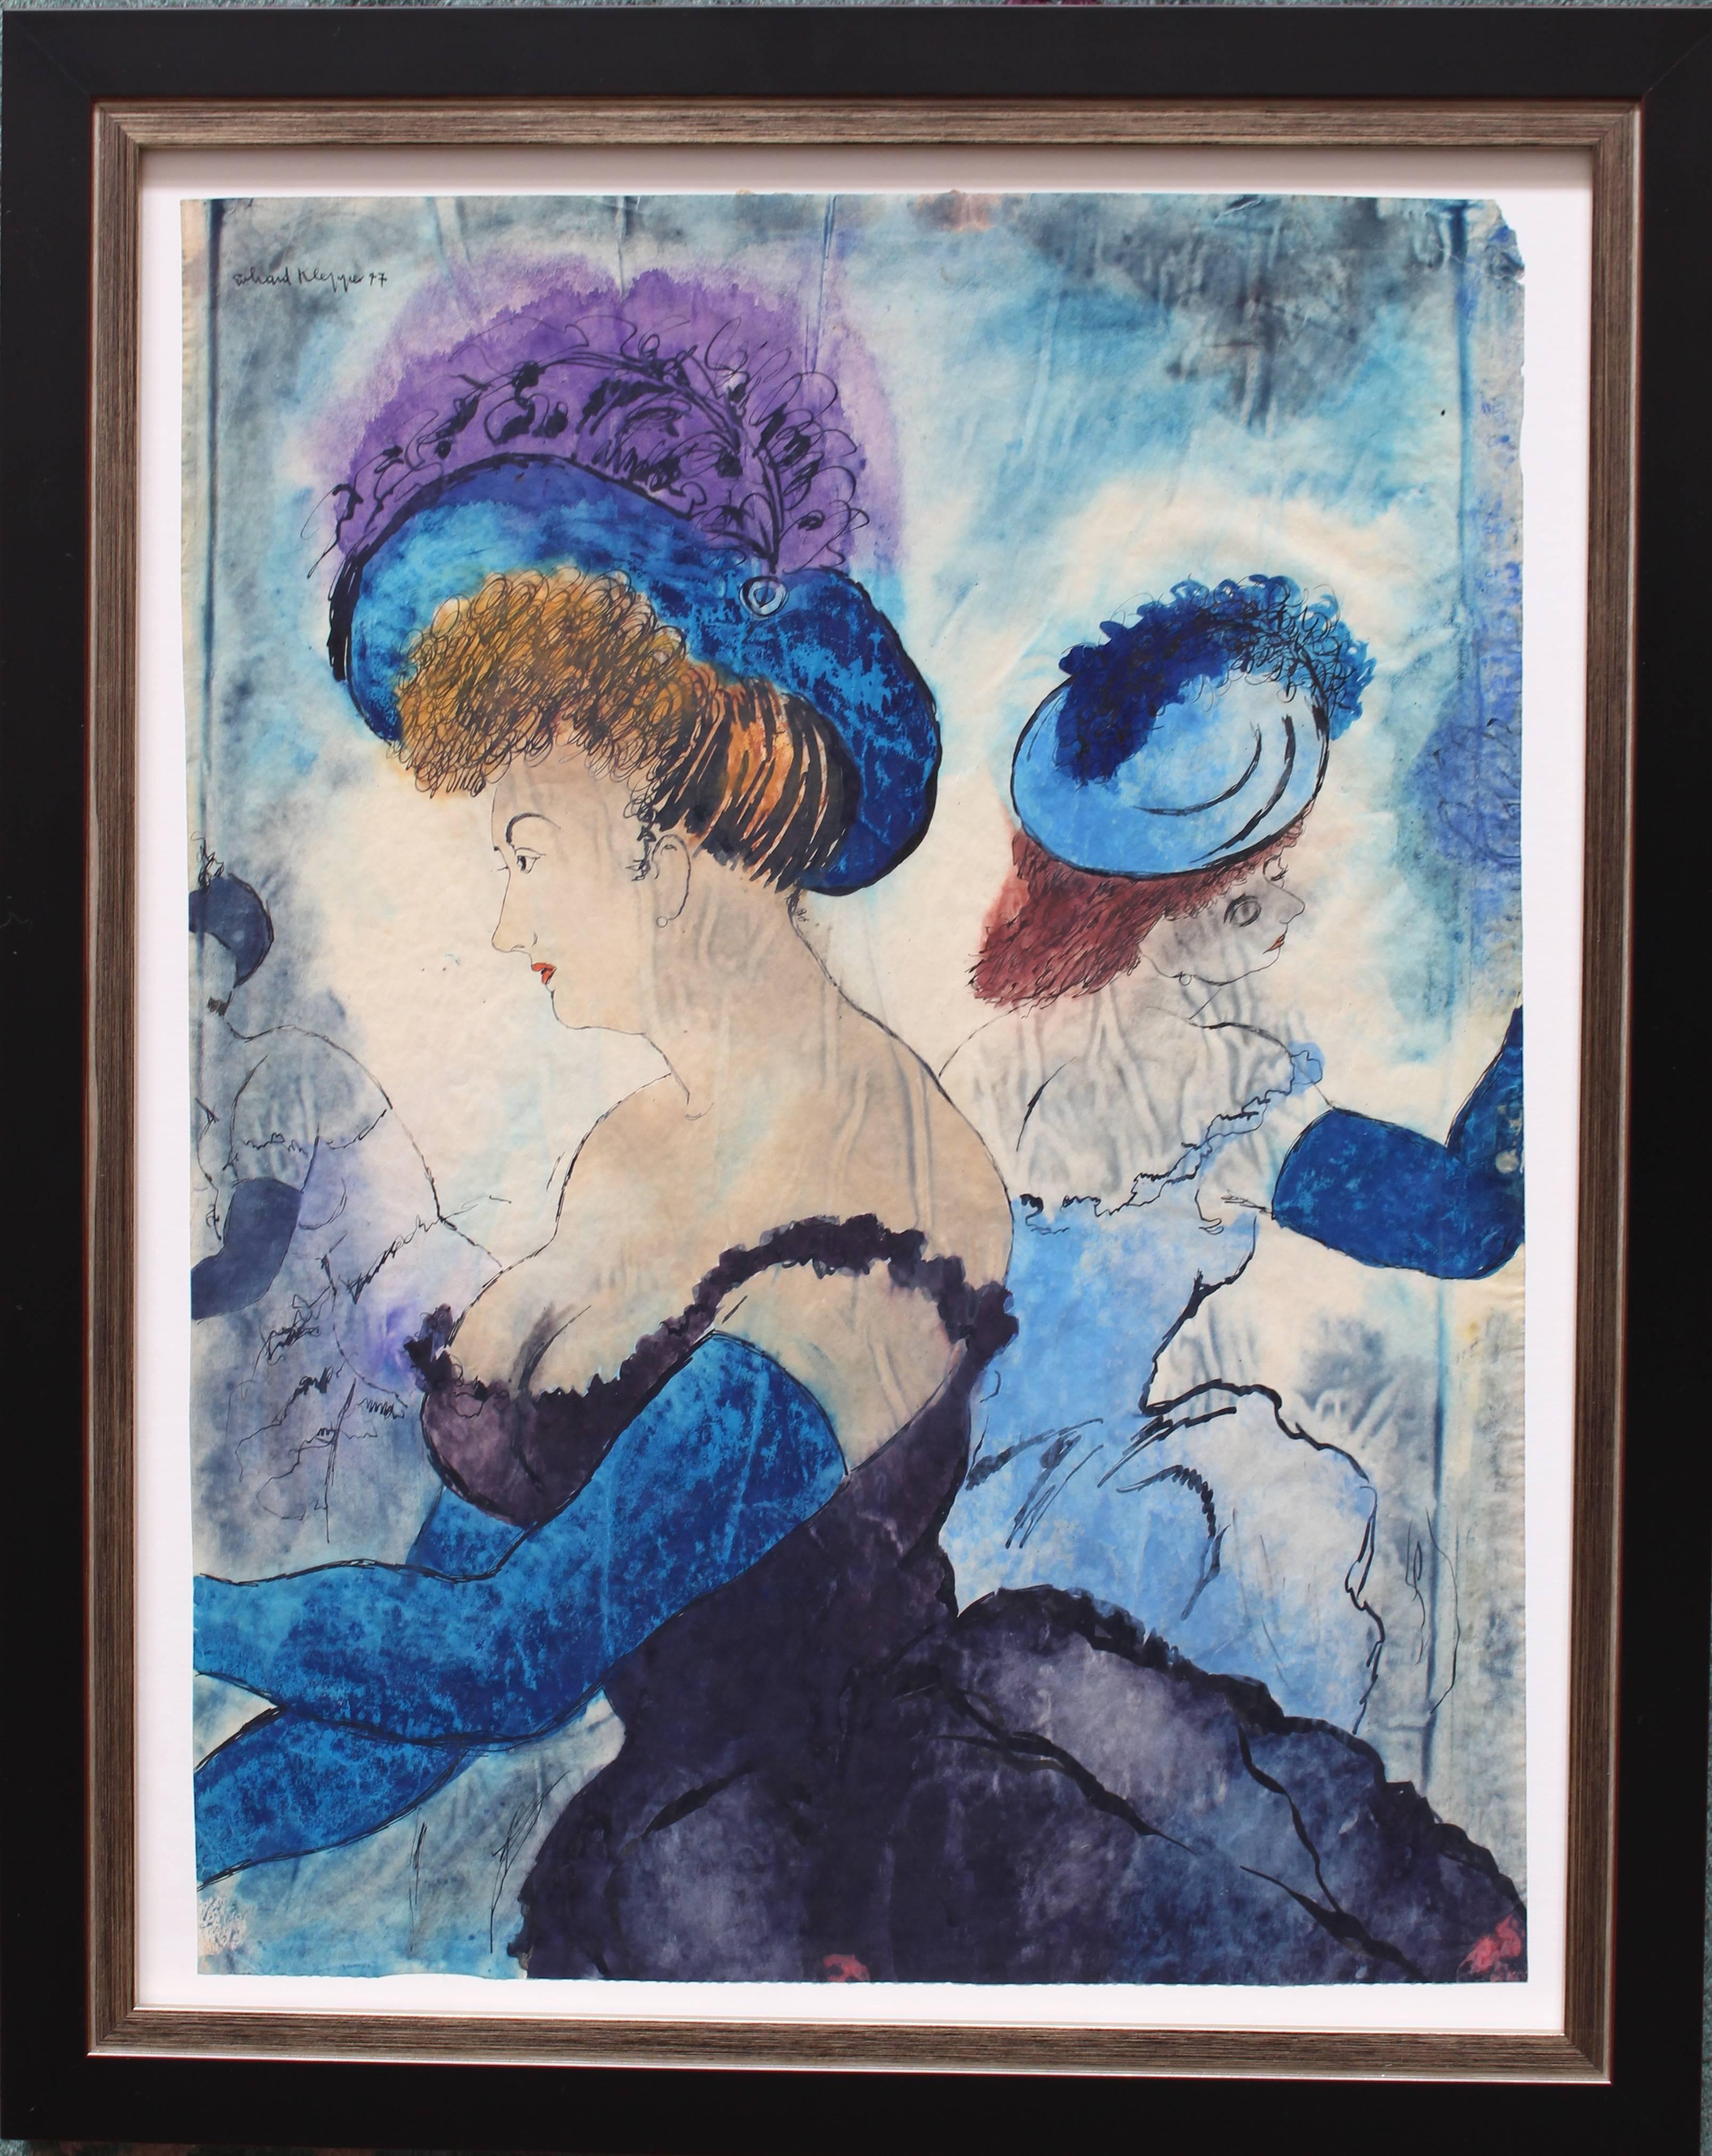 Watercolor, gouache on paper, 1947. Signed and dated left in the top. Framed.
Dimensions: 19.49 x 14.57 in ( 49,5 x 37 cm ), Framed: 23.15 x 18.62 in ( 58,8 x 47,3 cm )

Erhard Klepper ( 1906-1980 ) He was a German painter, draftsman, print maker,